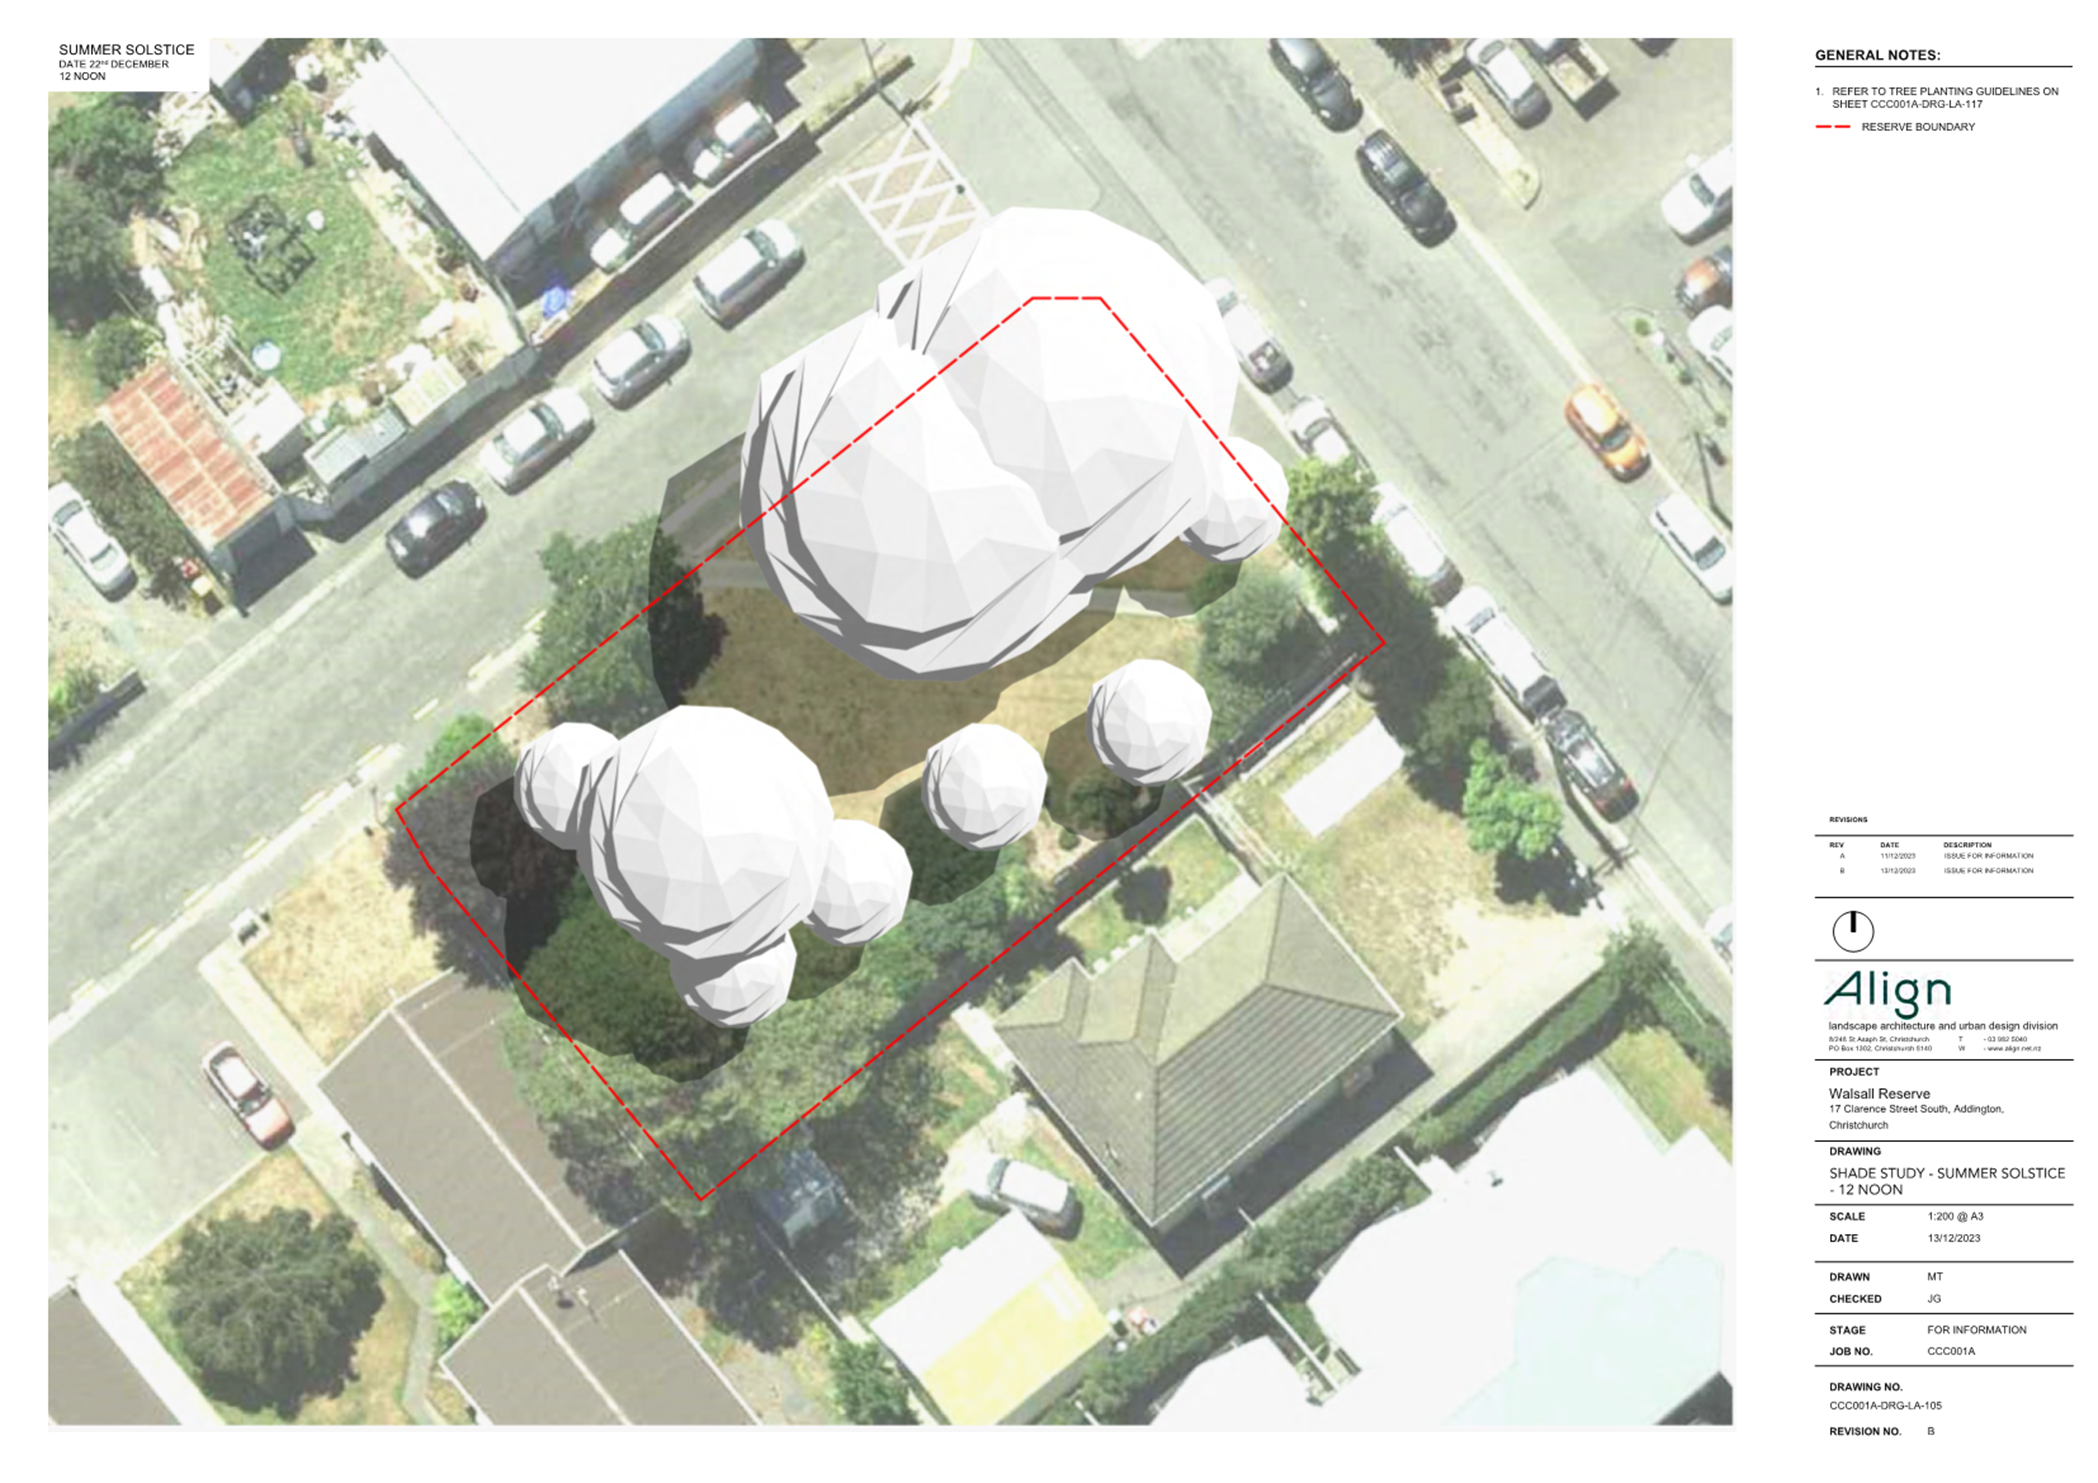 A aerial view of a building

Description automatically generated